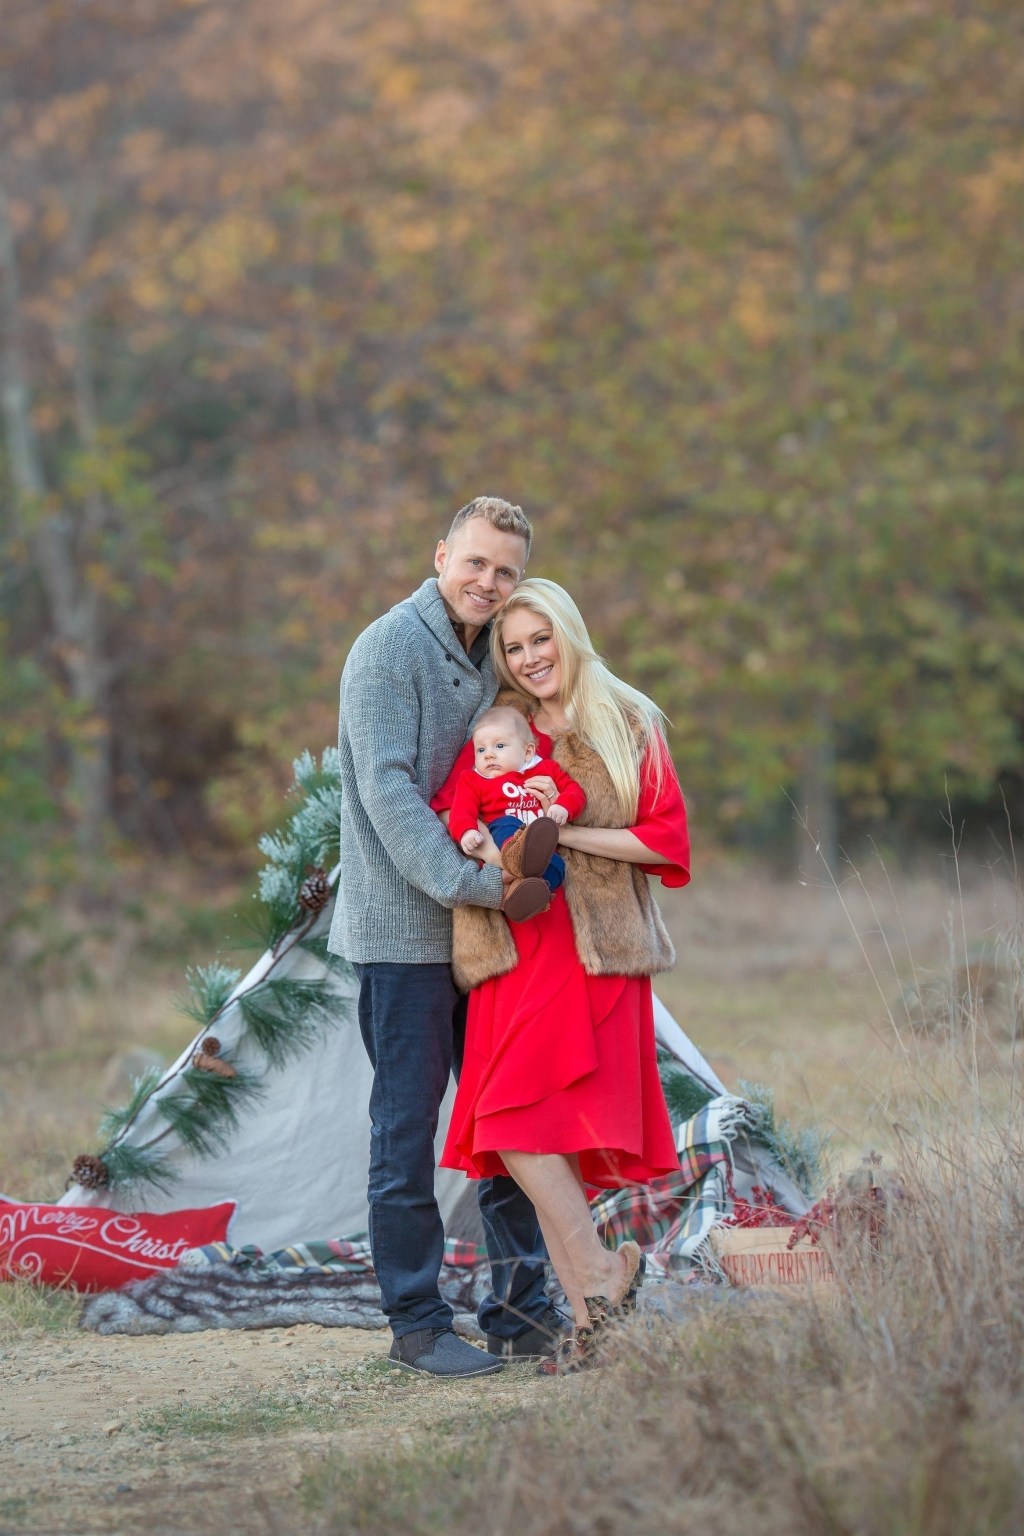 Heidi Montag and Spencer Pratt ring in the Holidays with Baby Gunner